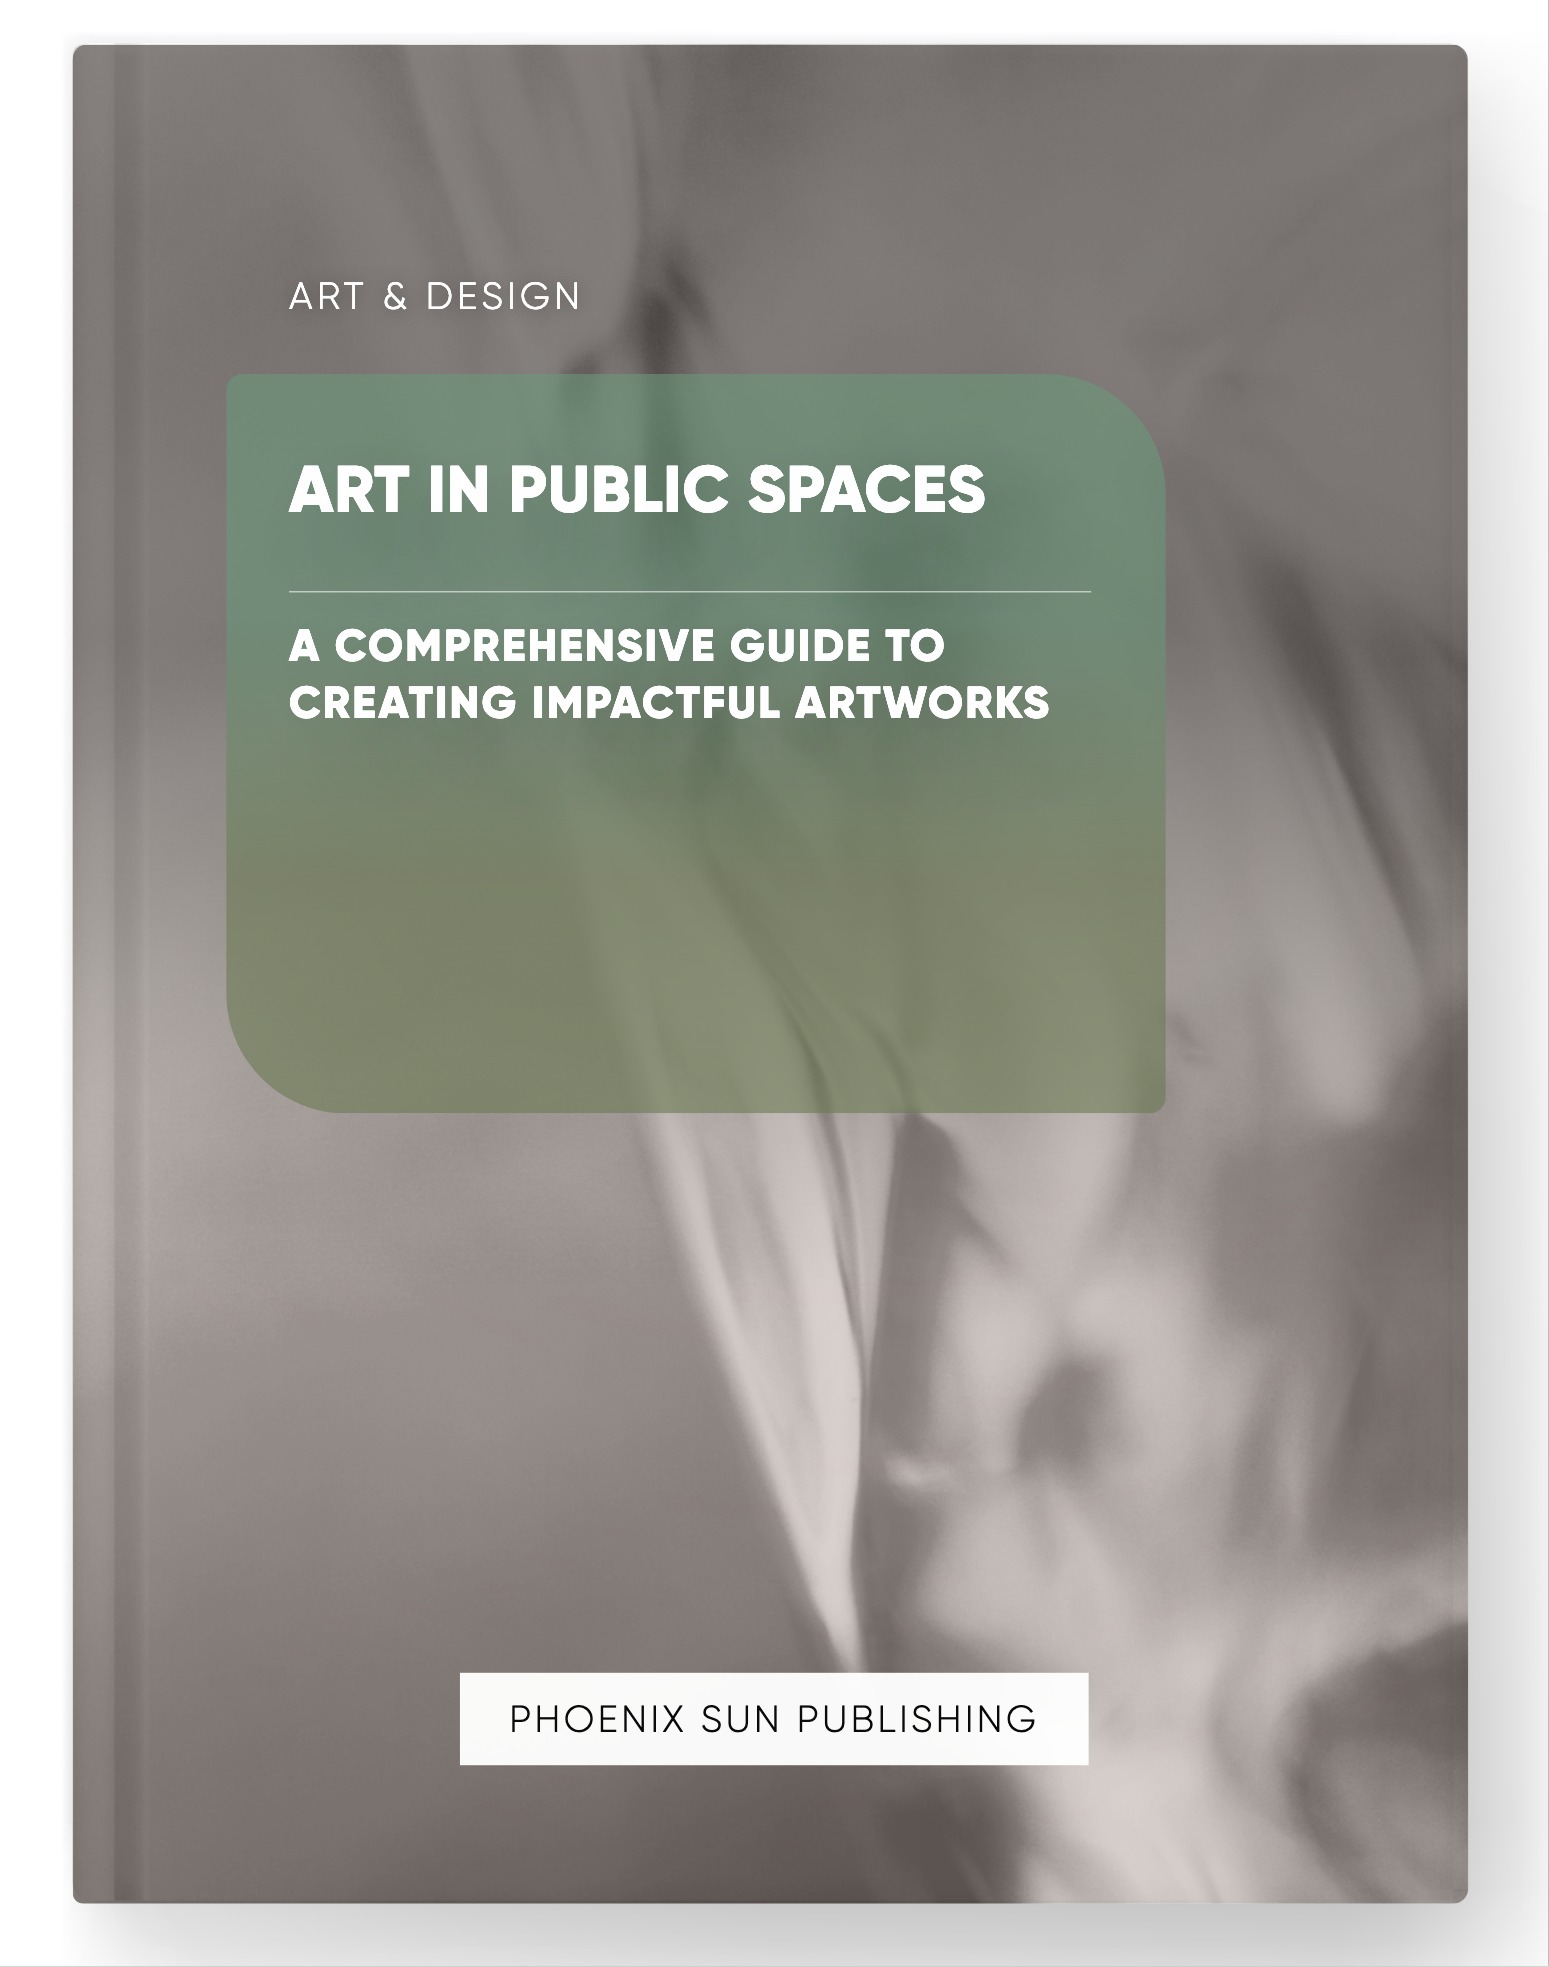 Art in Public Spaces – A Comprehensive Guide to Creating Impactful Artworks